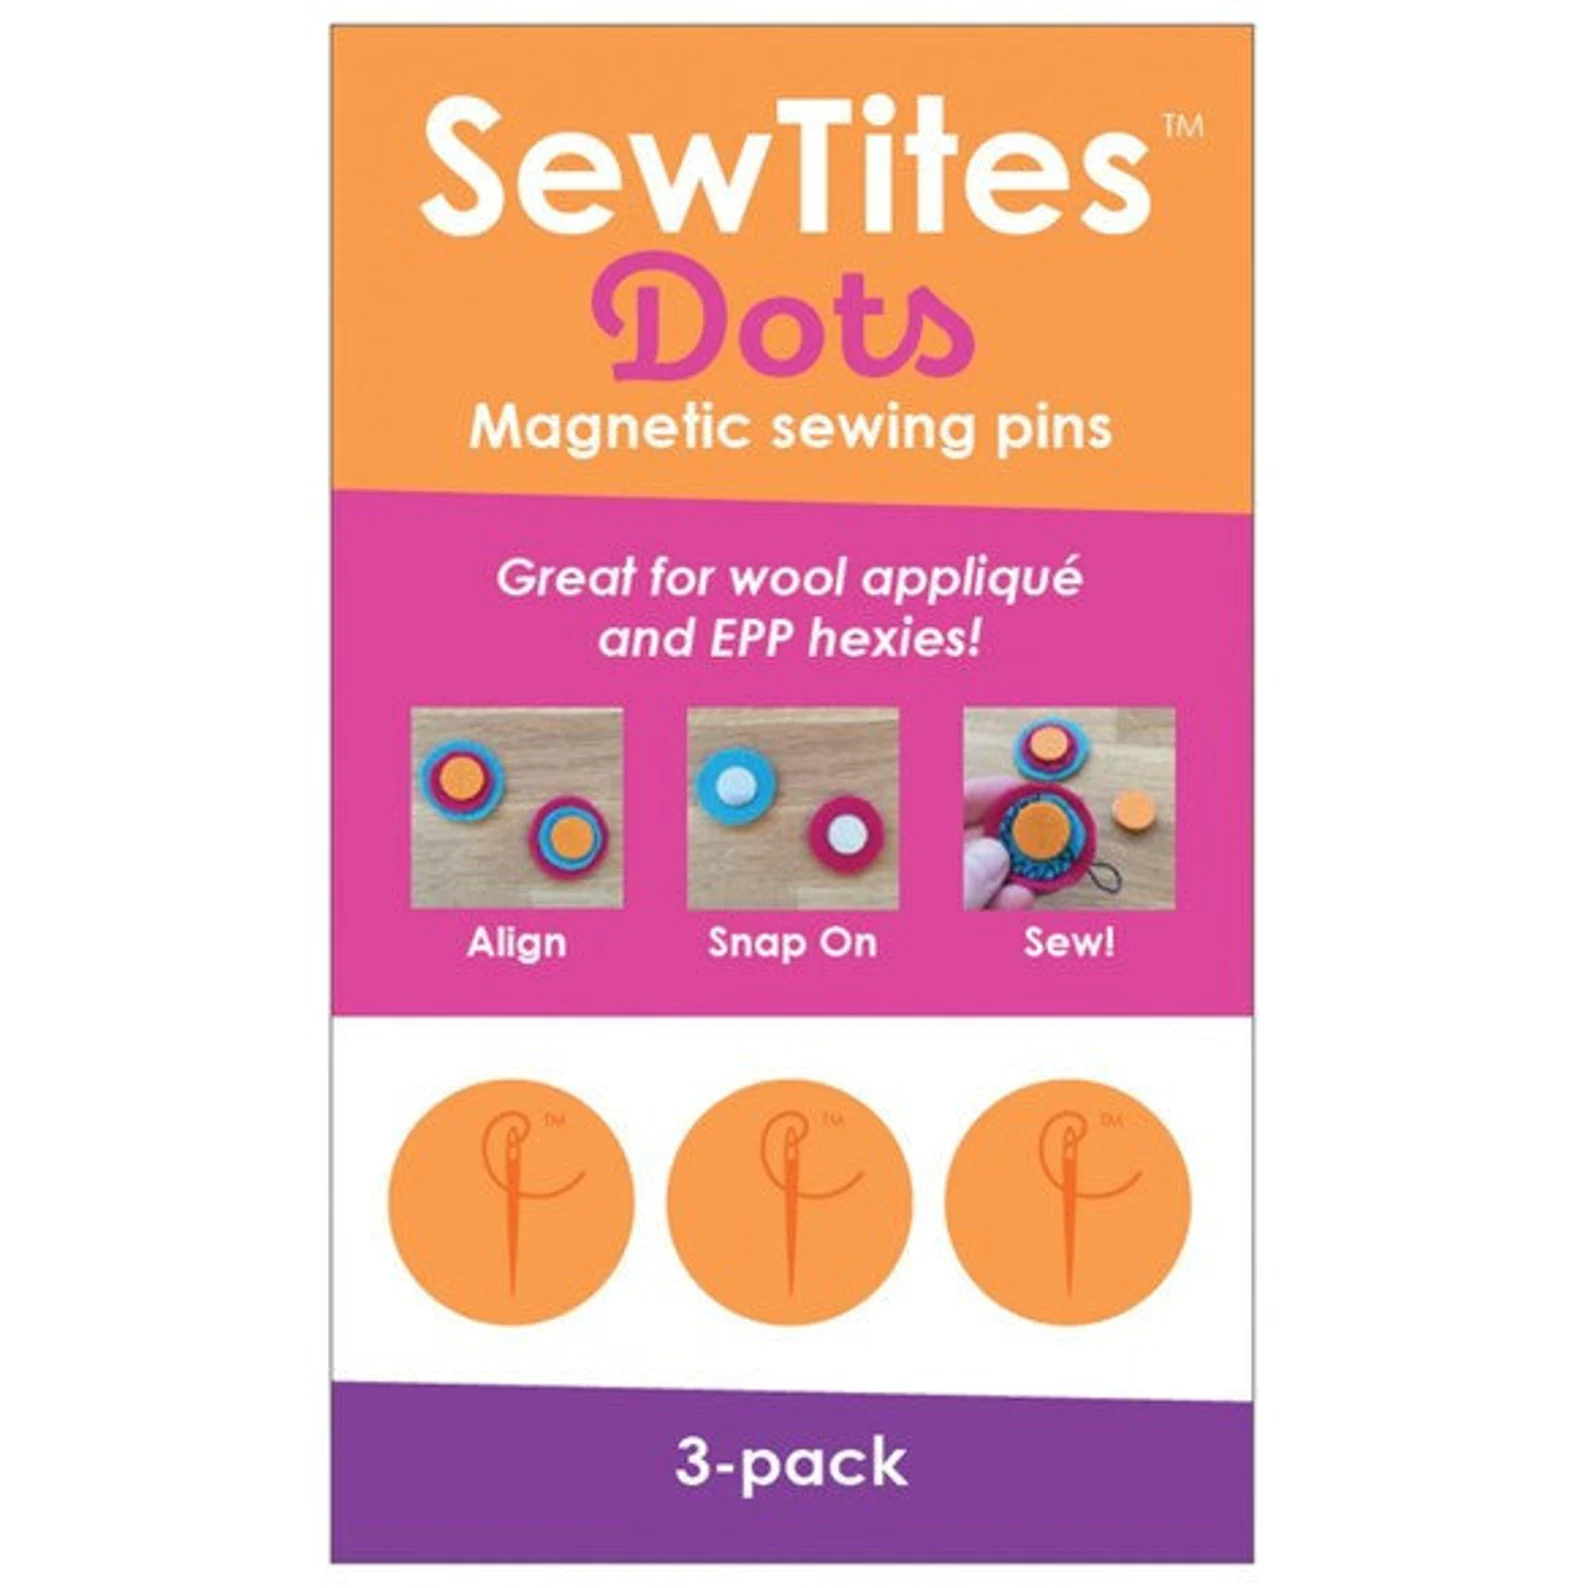 Featured image for “SewTites Dots 3 pack”